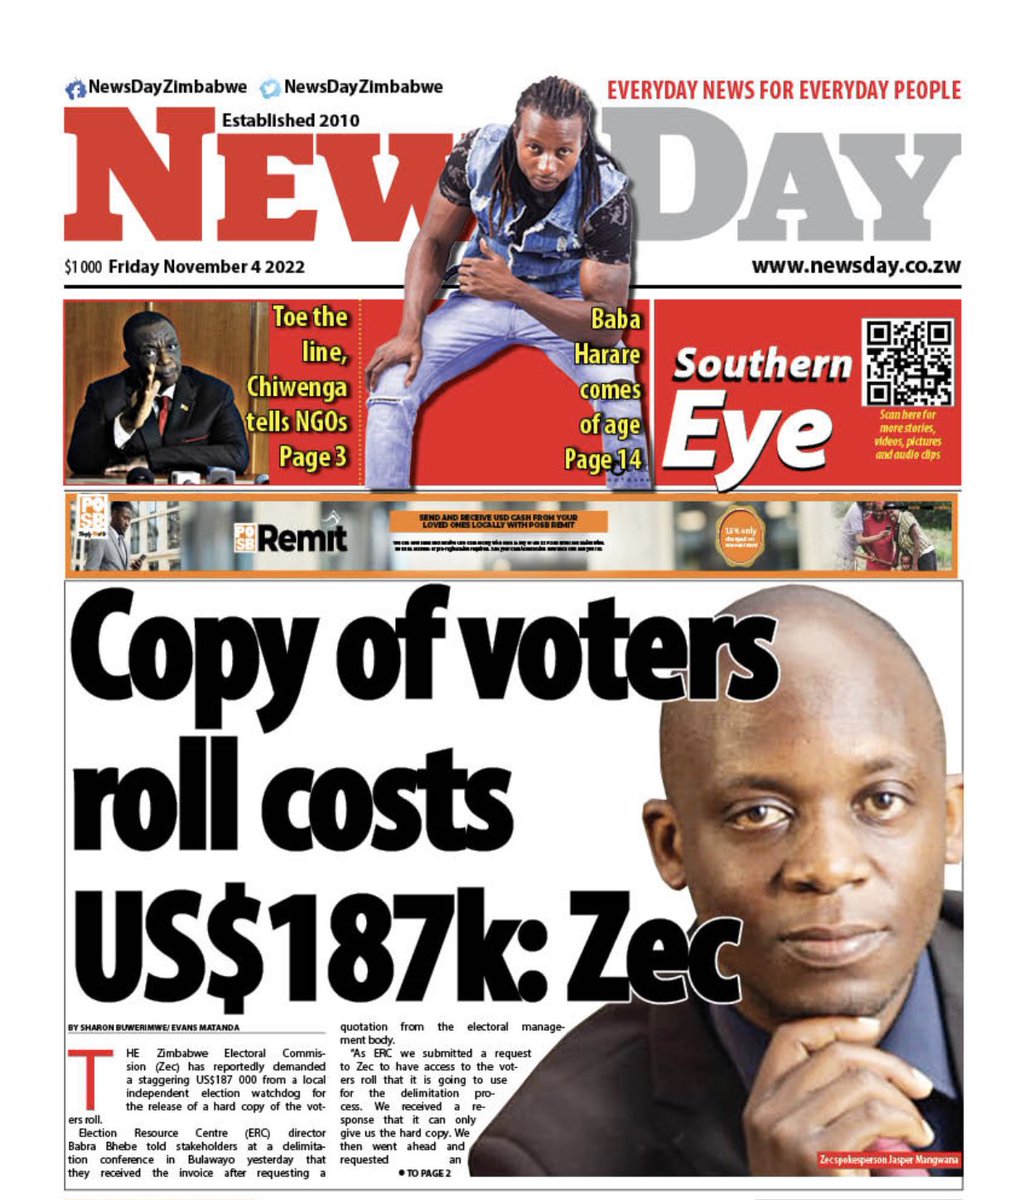 In Zimbabwe the ruling ZANUPF party is planning to rig the elections by denying competitors access to the voters roll, by charging US$187,000 for a copy according to @ercafrica director in this front page story in the @NewsDayZimbabwe today. An election is the voters roll.